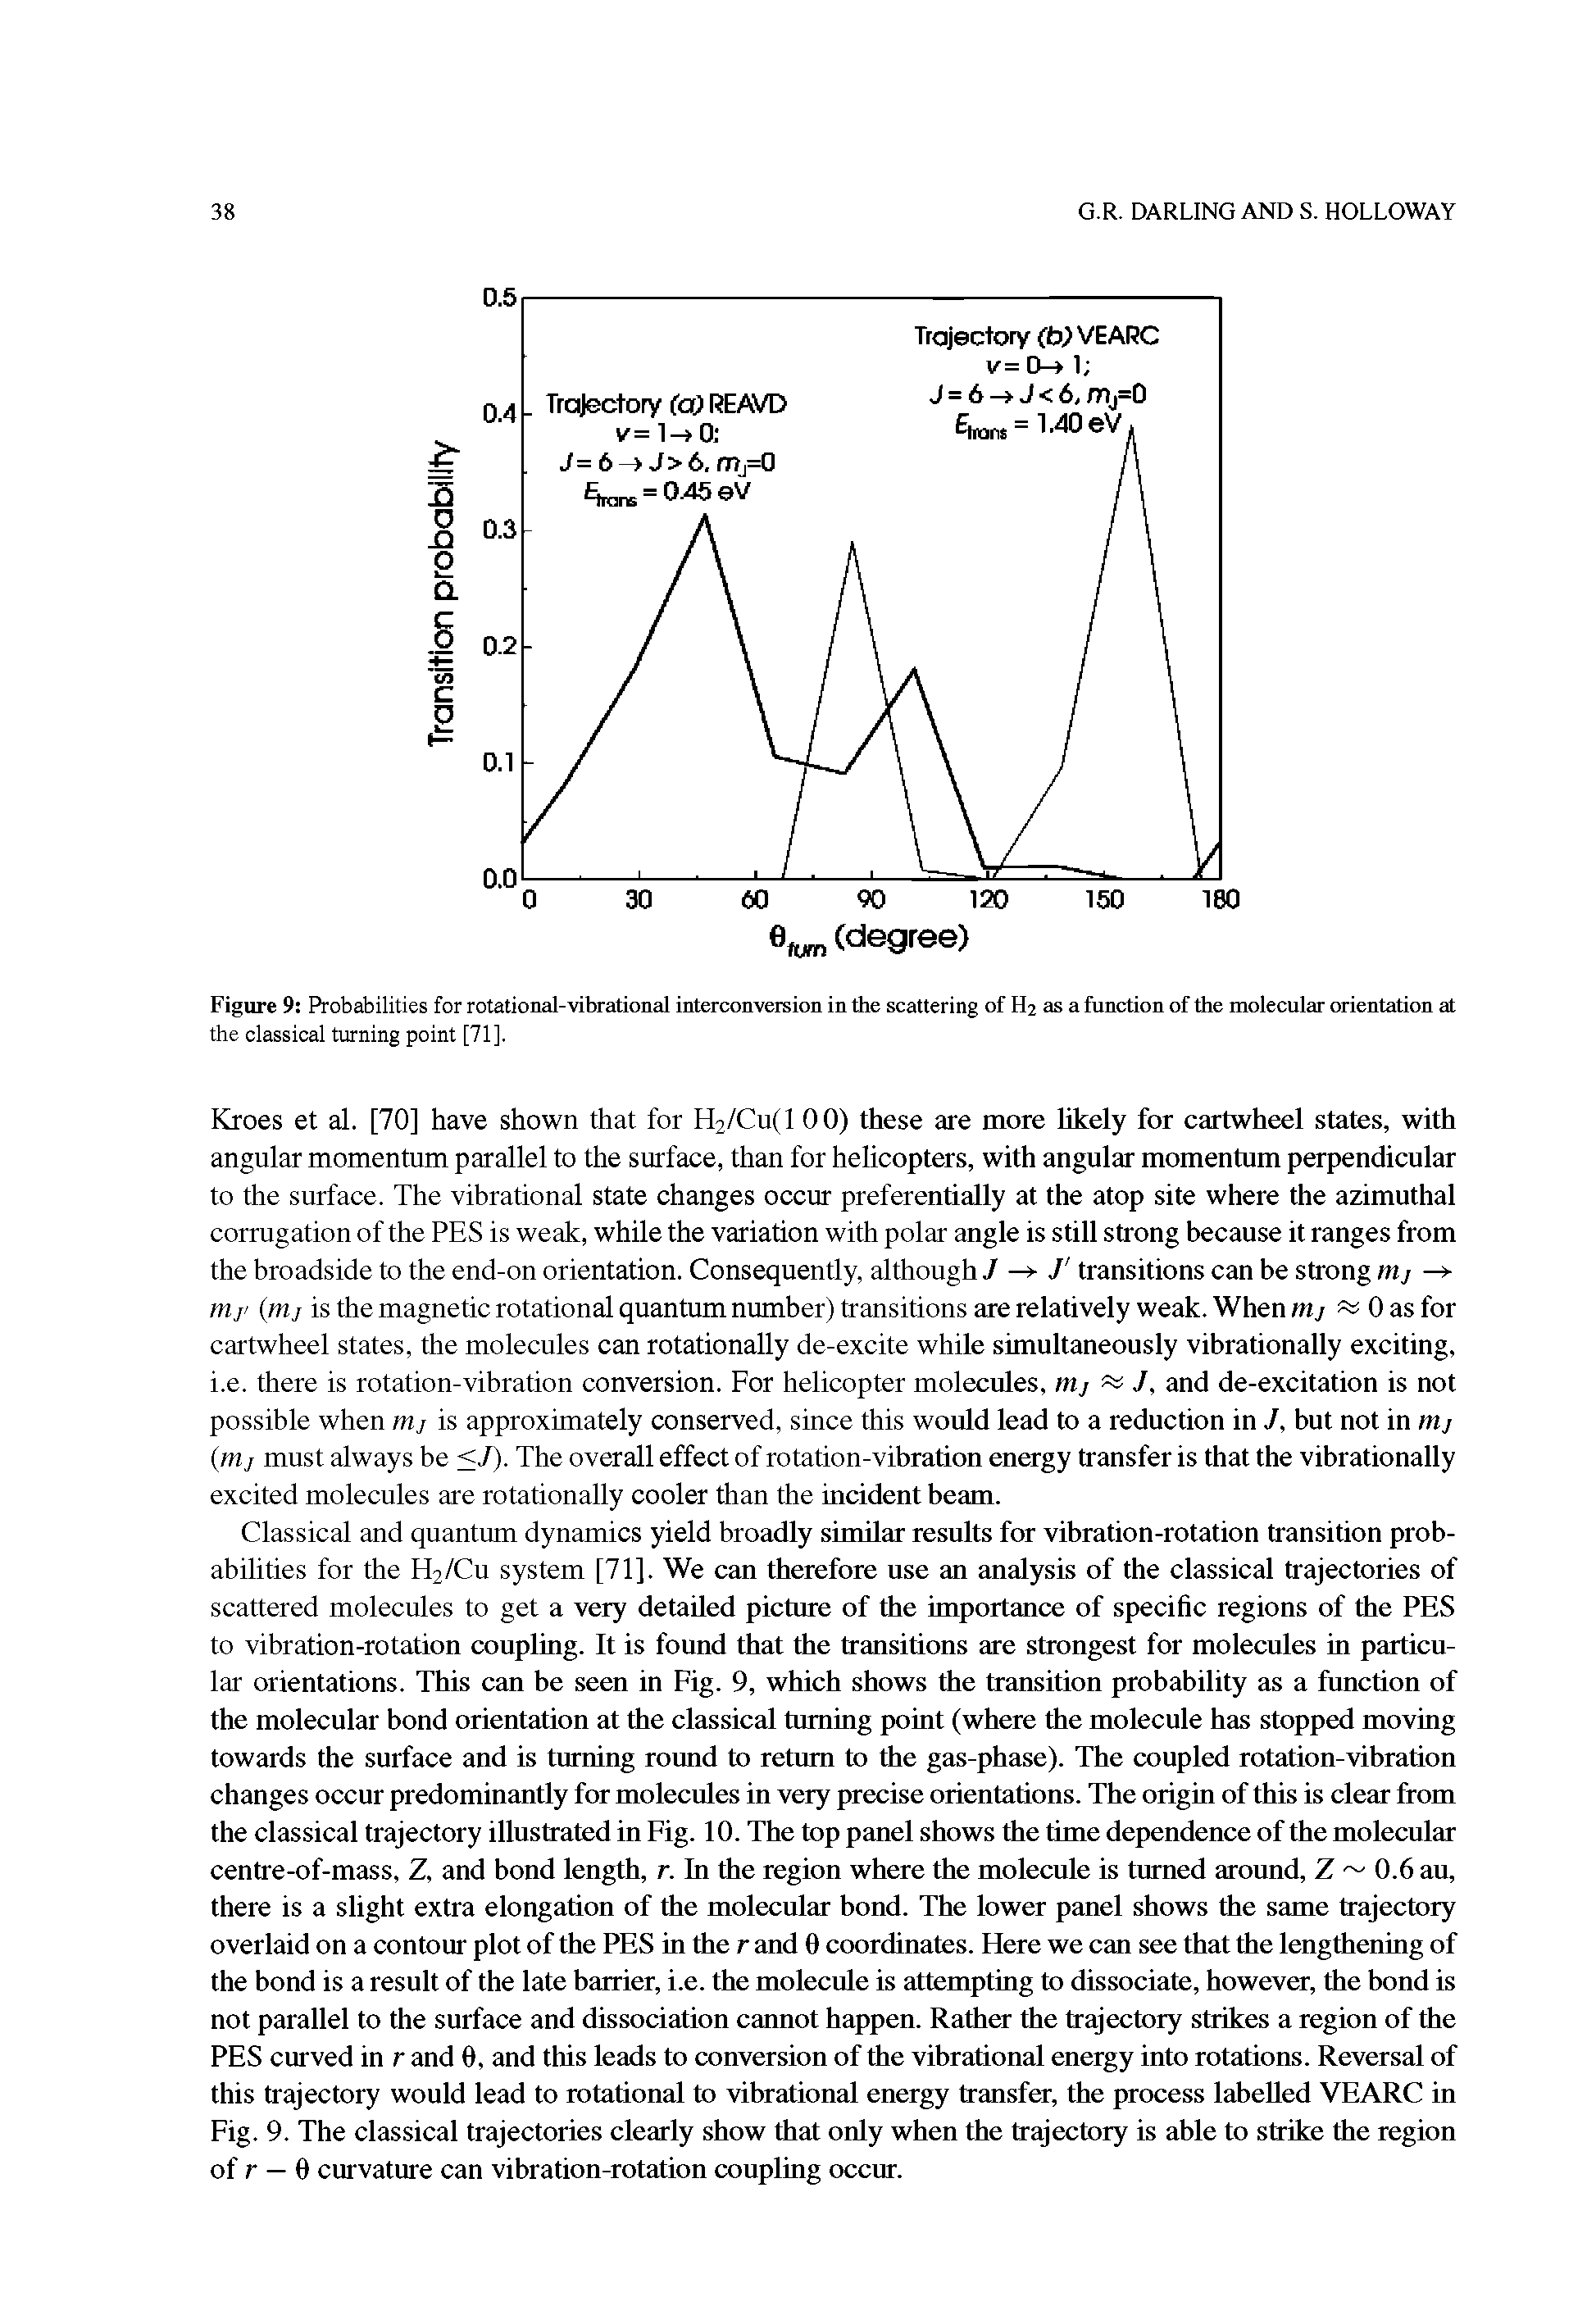 Figure 9 Probabilities for rotational-vibrational interconversion in the scattering of H2 as a function of the molecular orientation at the classical turning point [71].